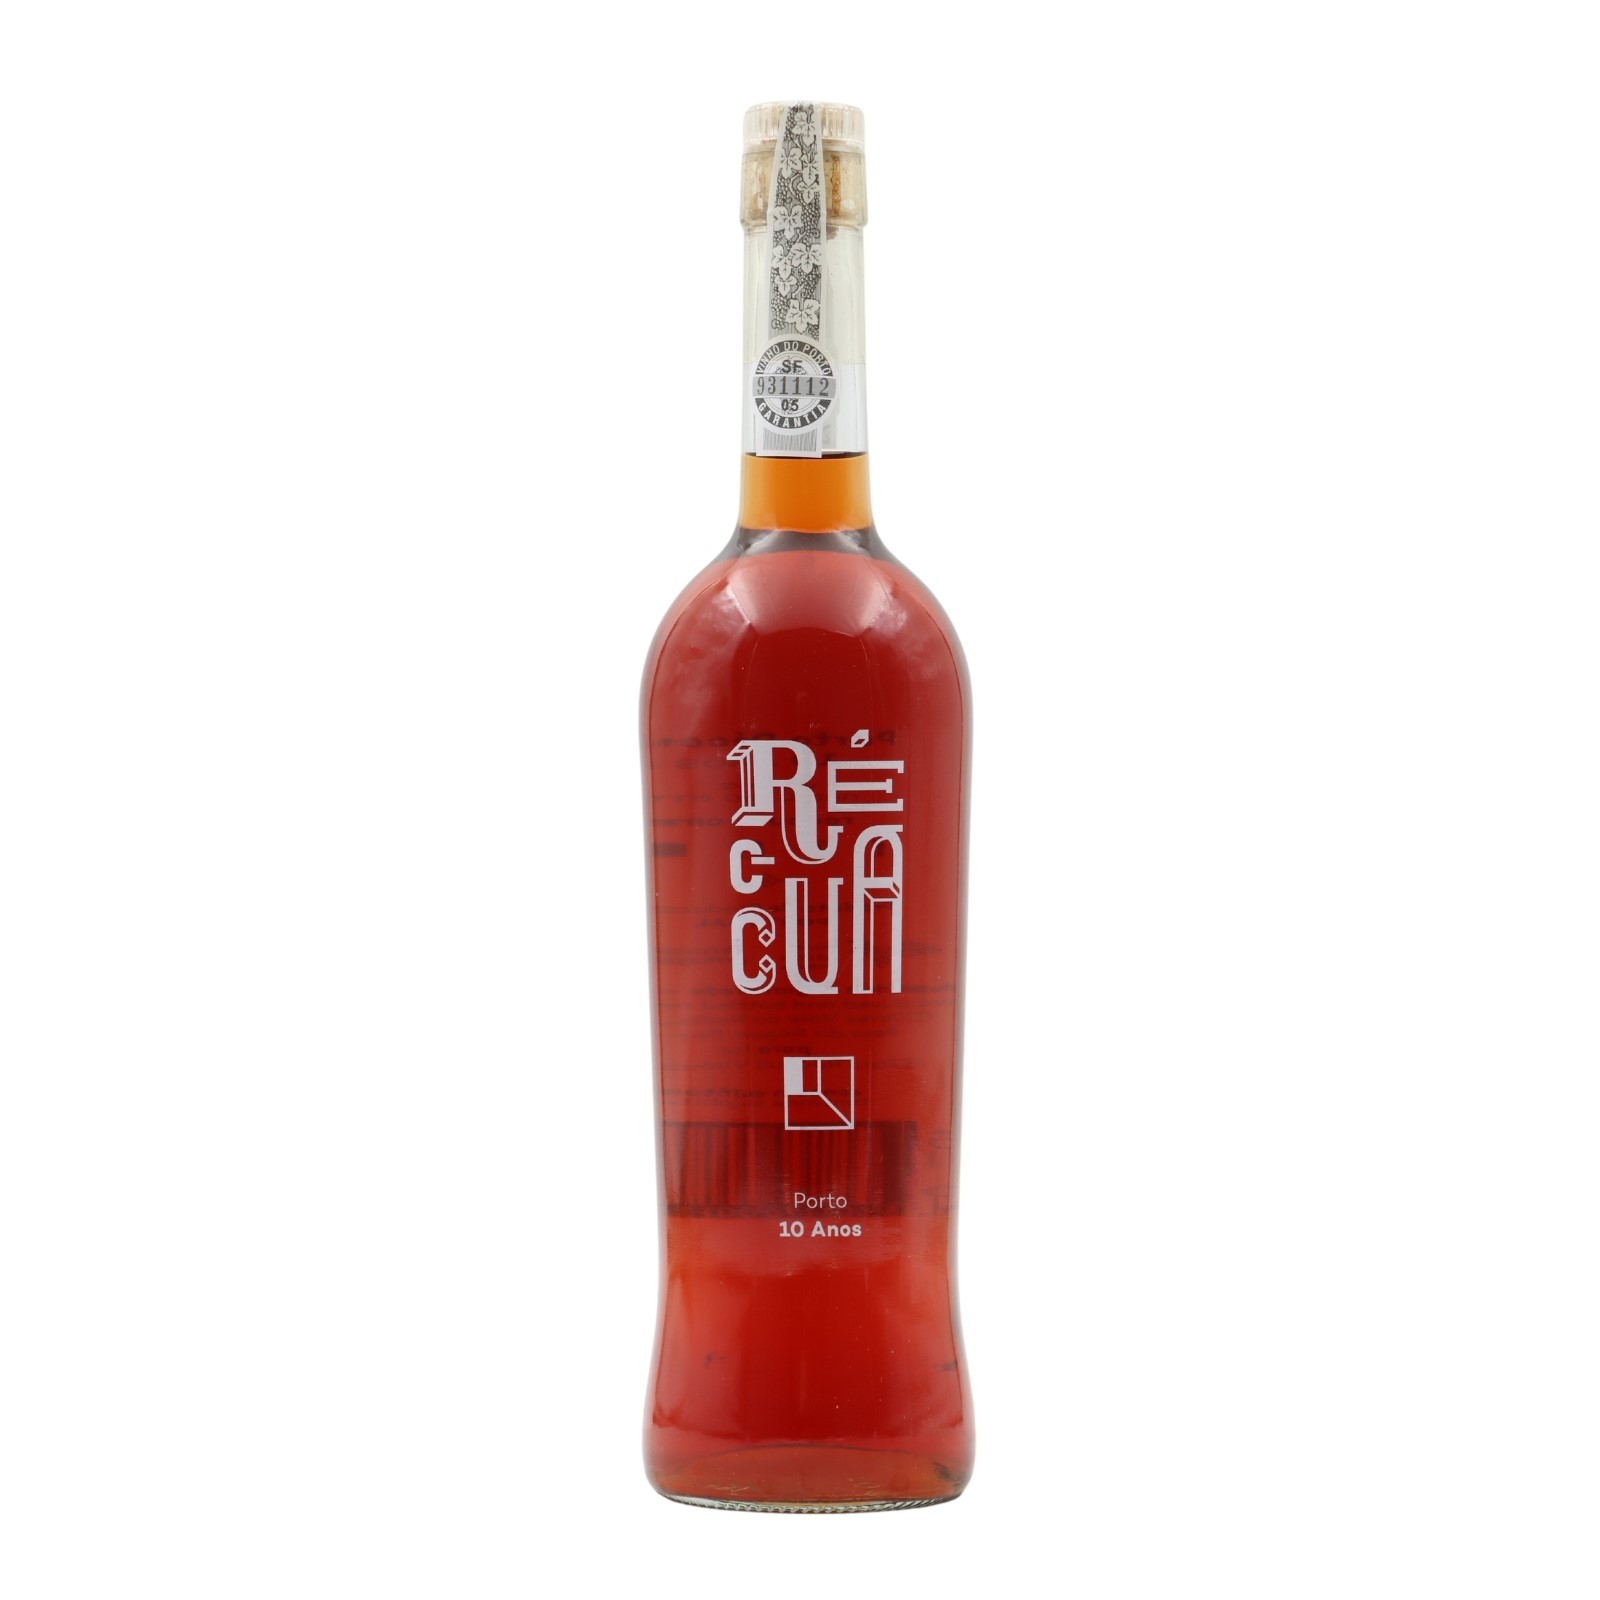 Réccua 10 years Tawny Cocktail Port